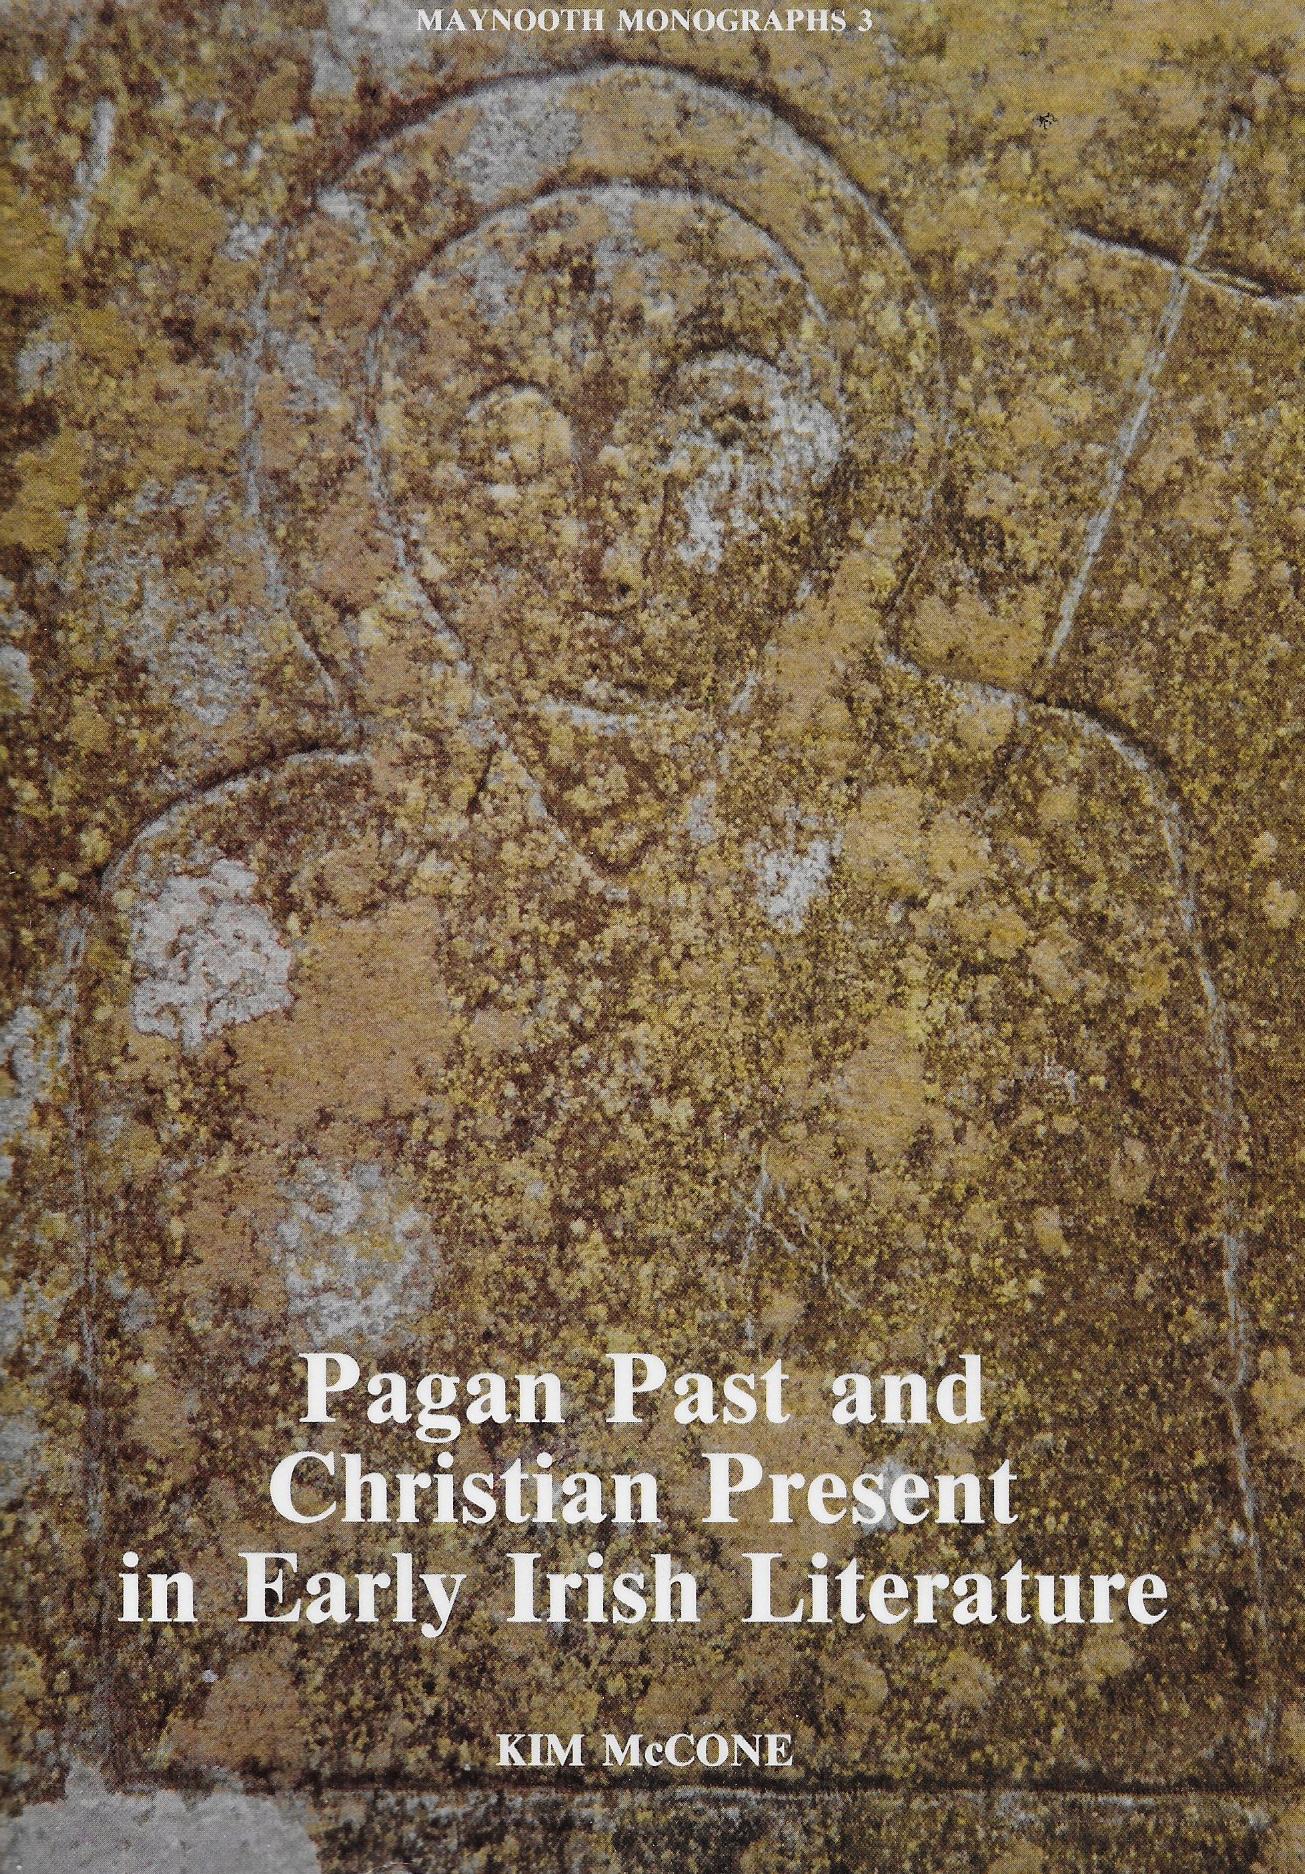 Pagan Past and Christian Present in Early Irish Literature (Maynooth Monographs 3)